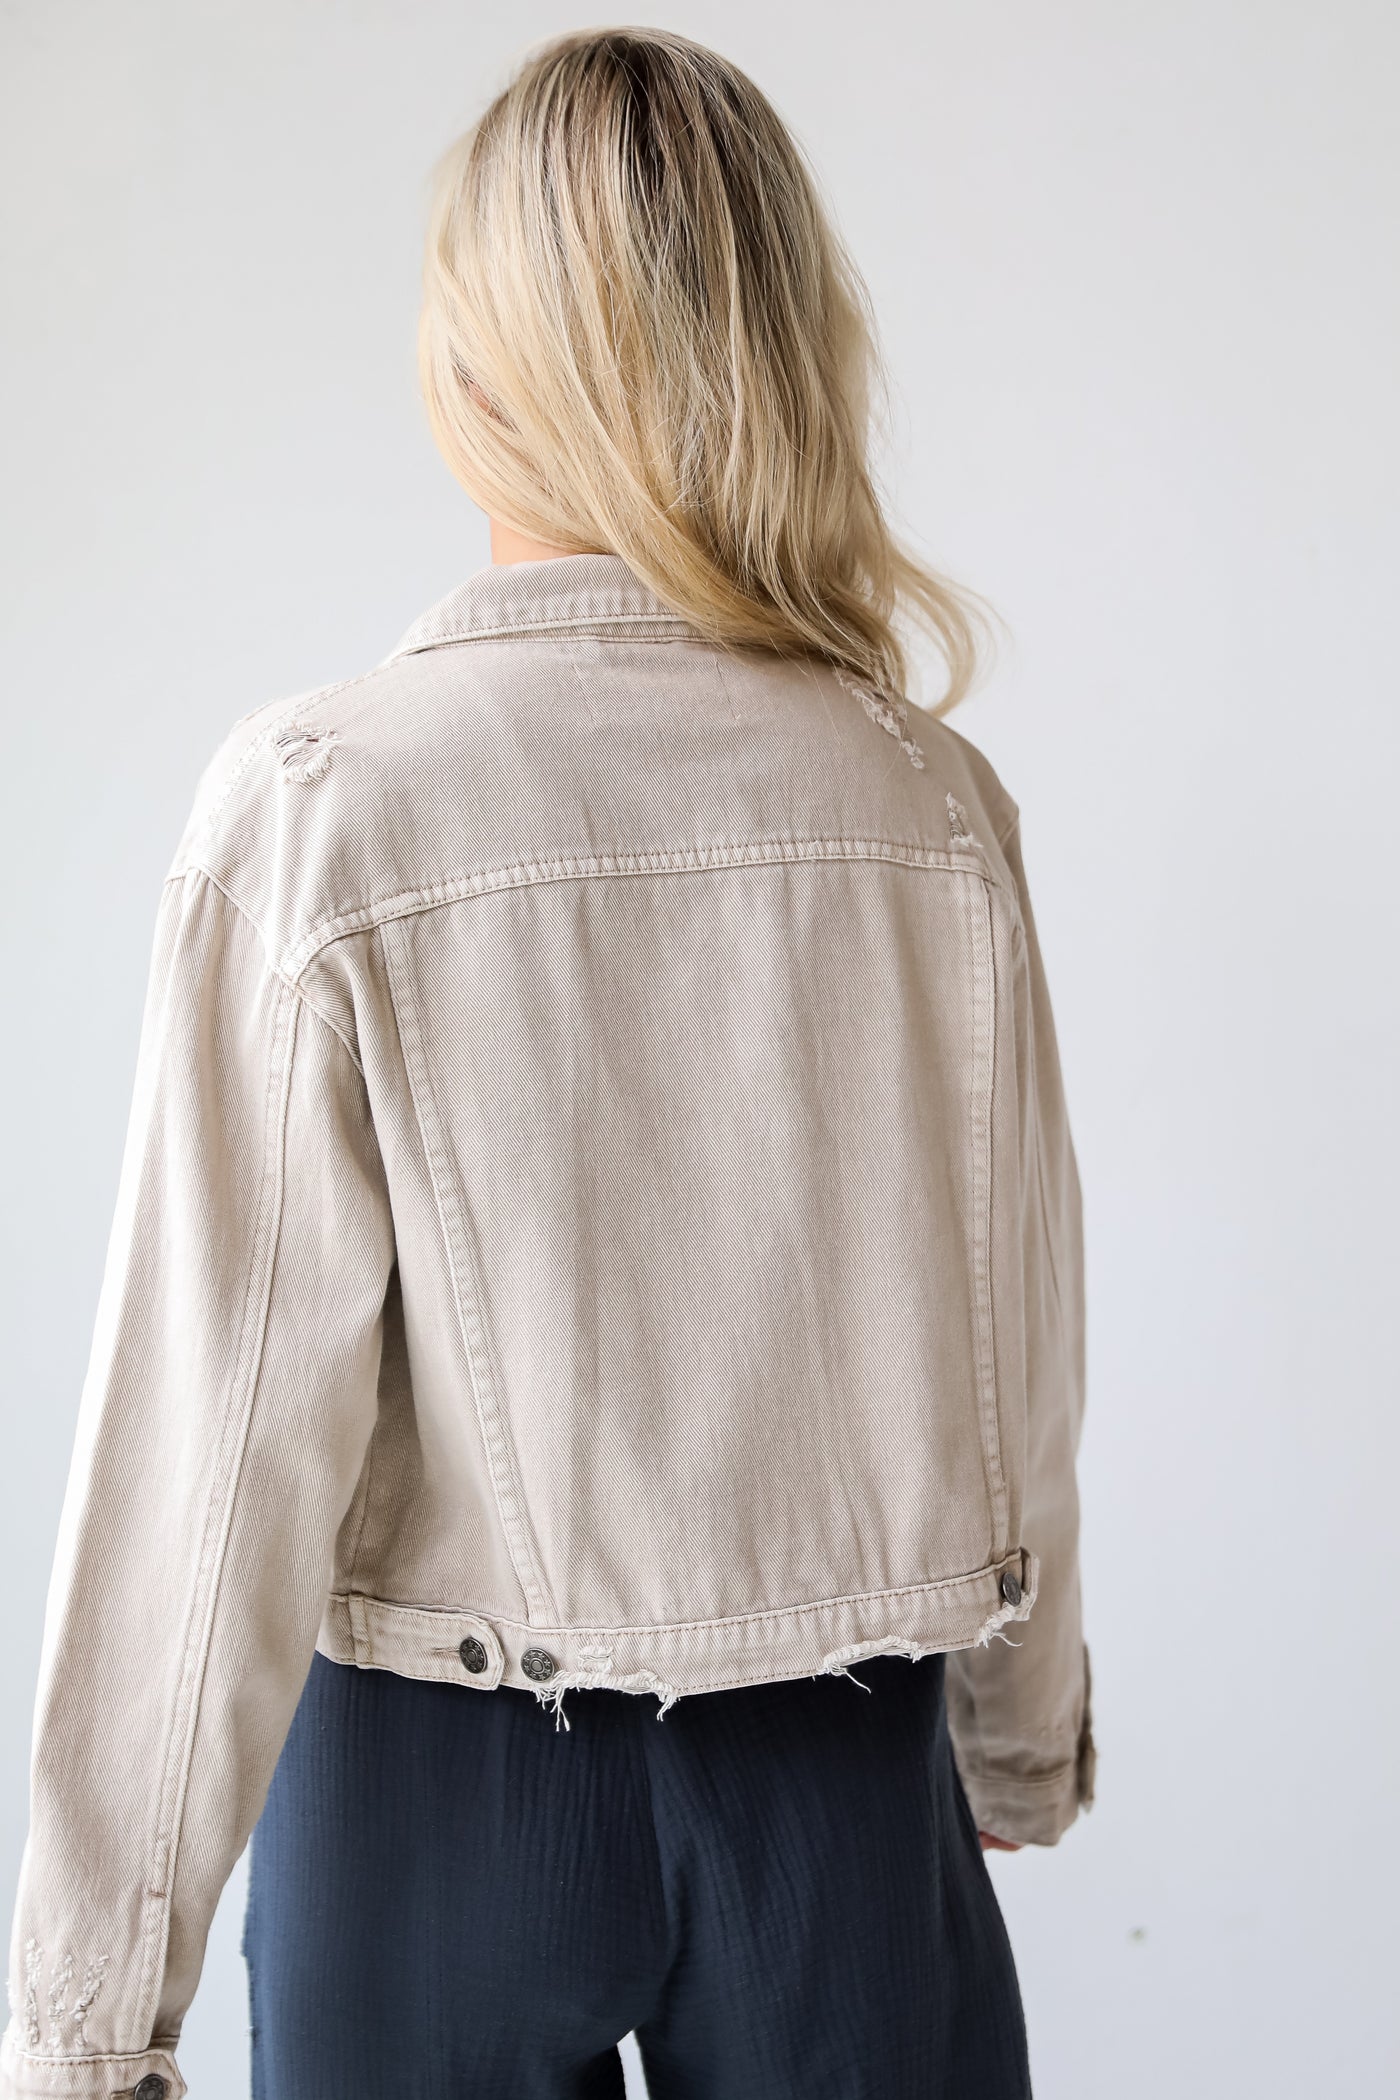 Definite Icon Taupe Distressed Cropped Denim Jacket is lighweight, mid-crop fit, and the perfect spring layer. Taupe jacket. spring jacket.distressed denim jacket